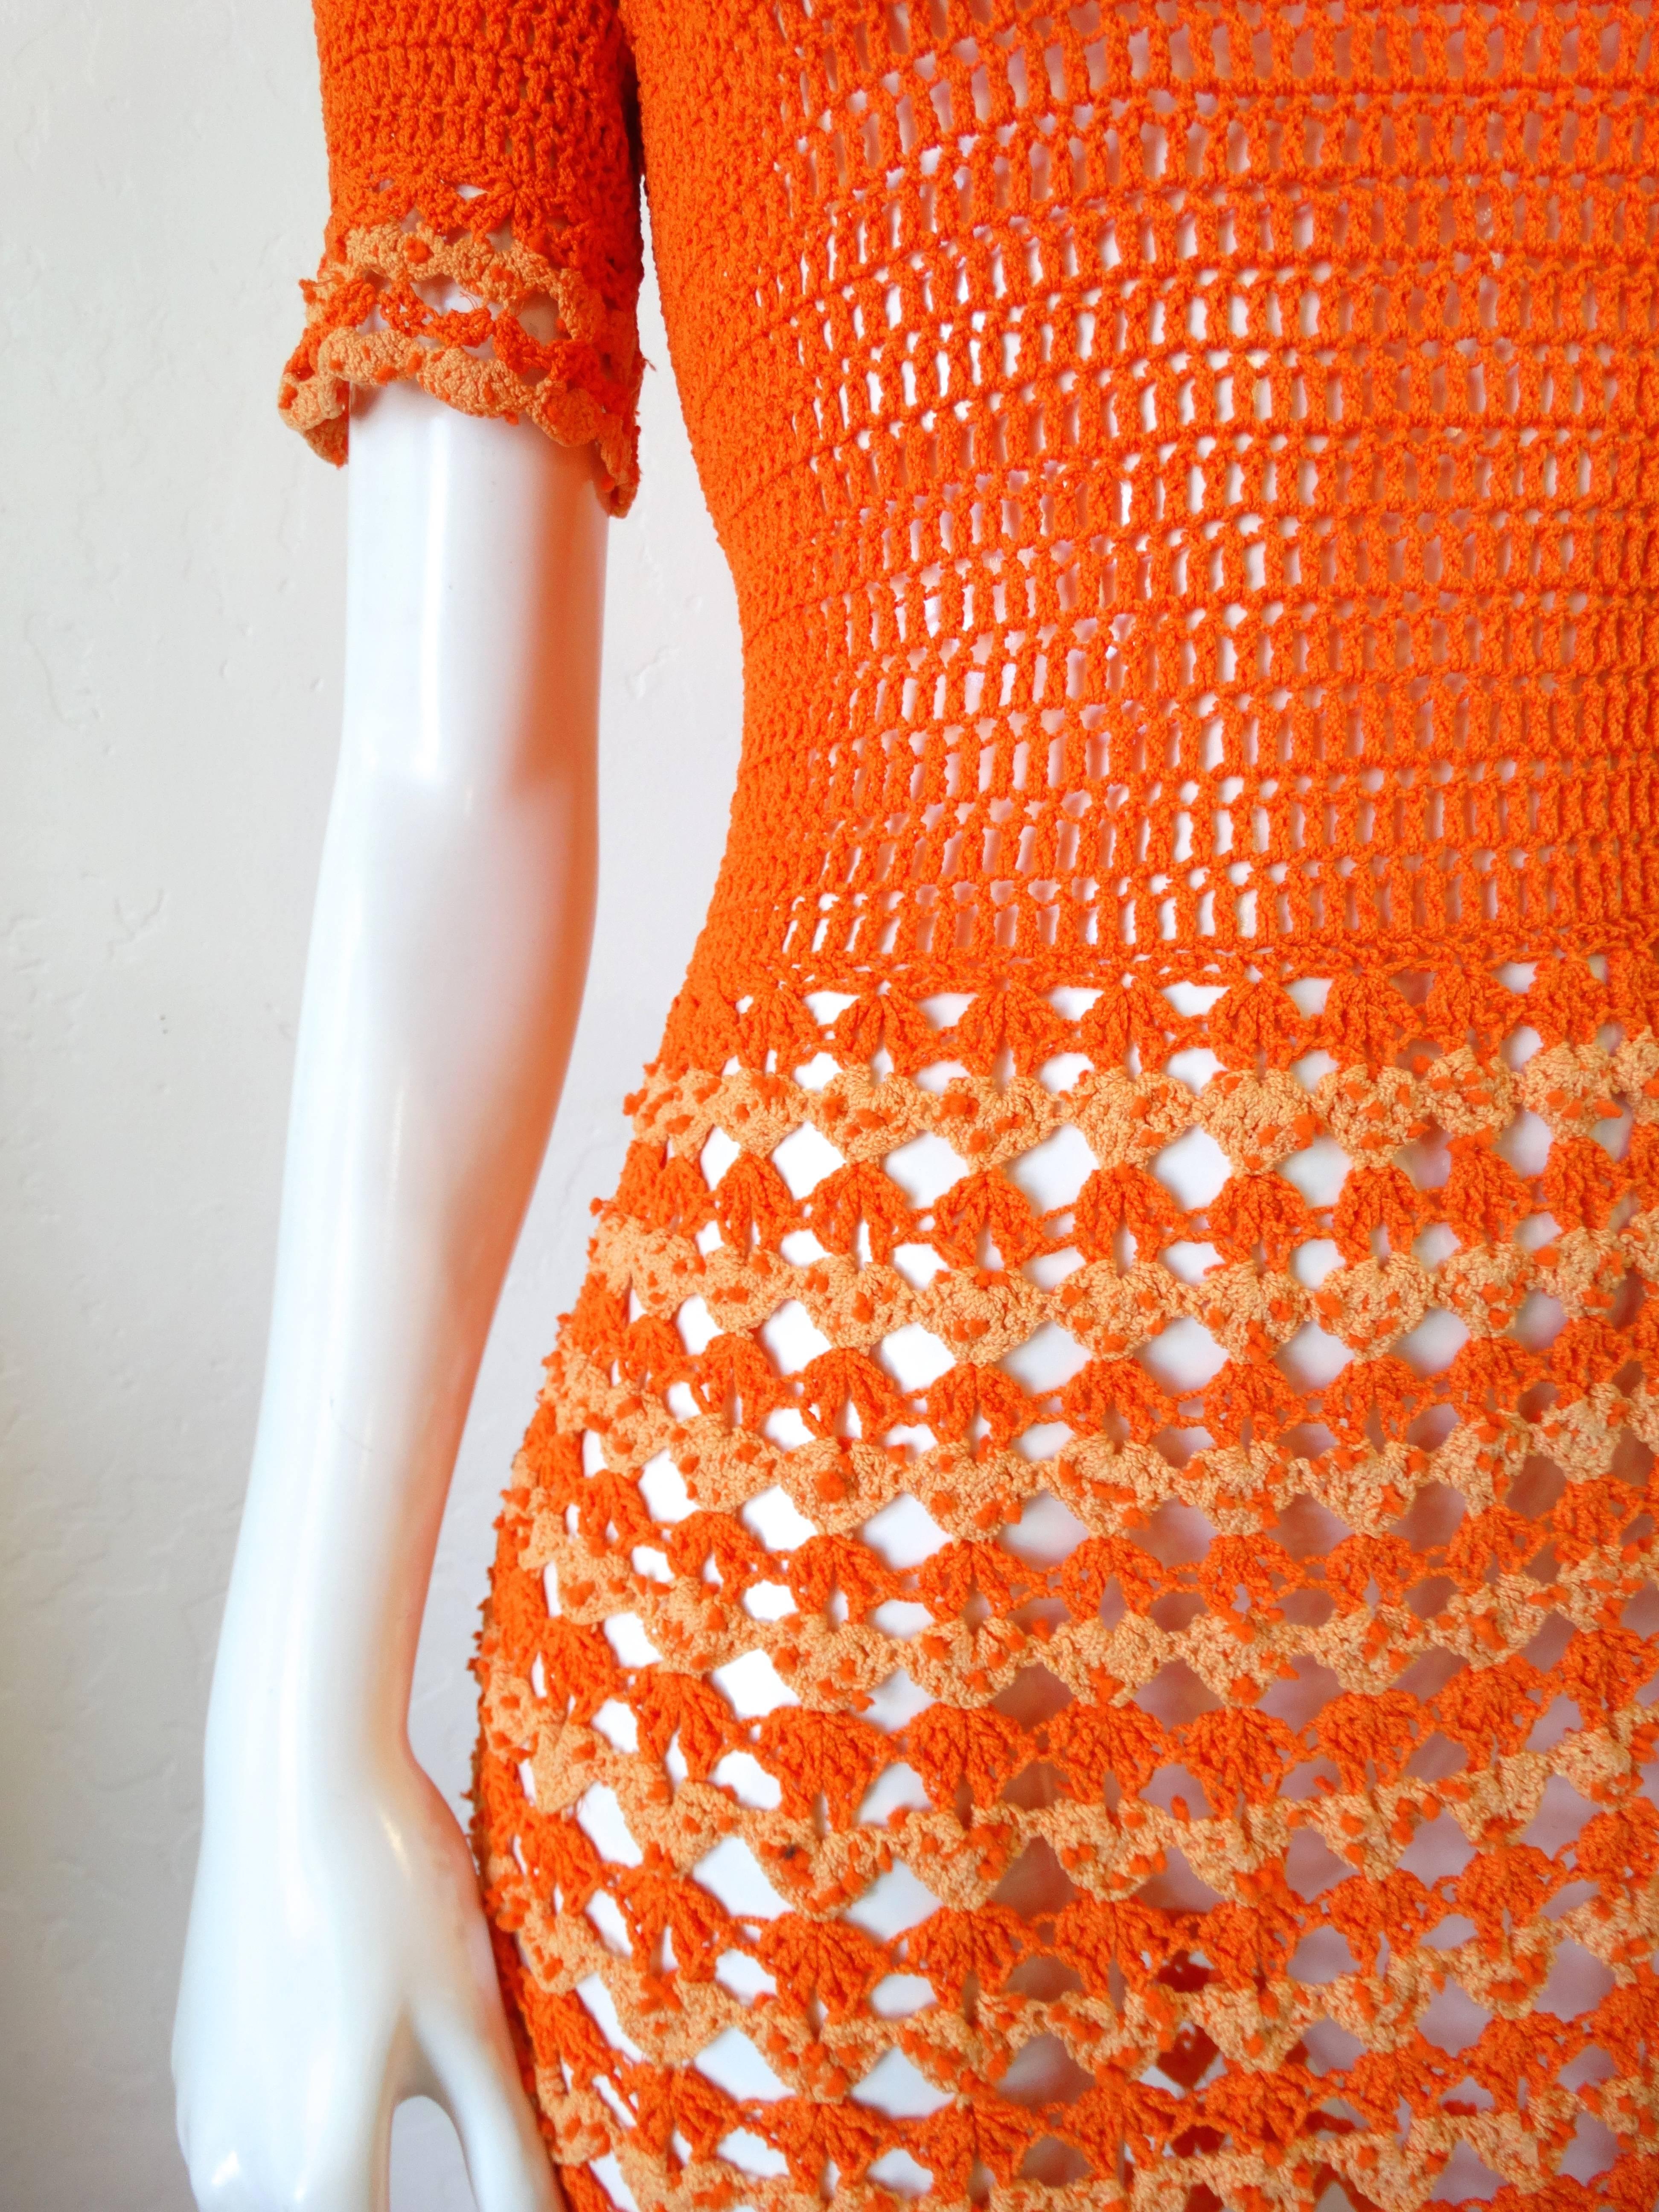 Incredible 1970's orange knit gown! Vibrant two-tone orange tighter knit on the top with a more open crochet fabric from the waist down. metal zipper that zips up the back. Crochet ruffle neckline and sleeve! Even better in person.
